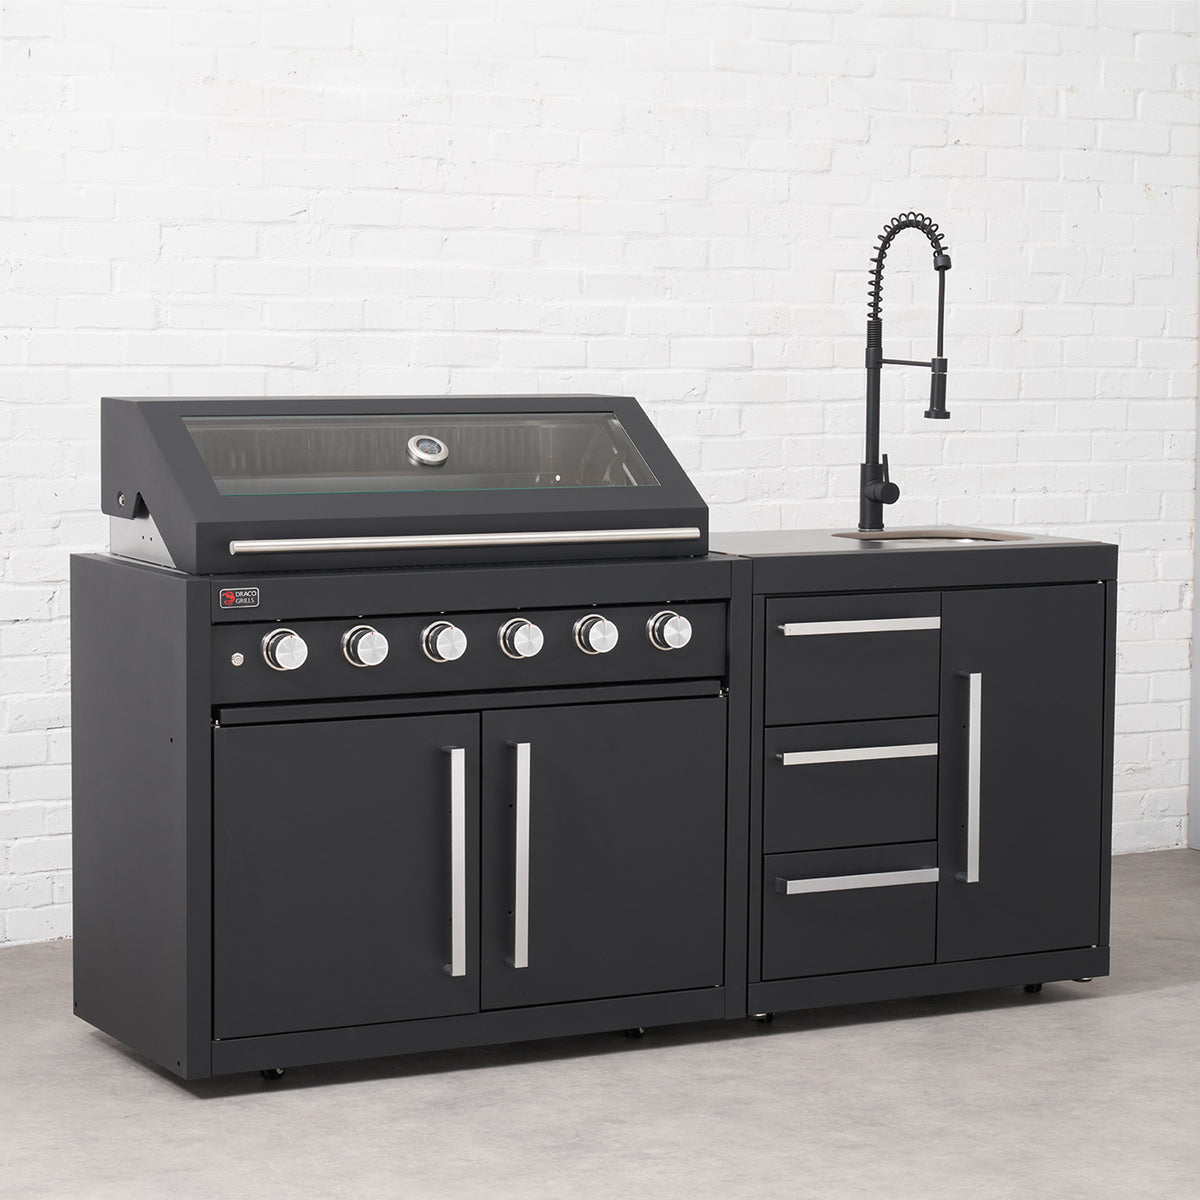 Draco Grills Fusion 6 Burner Black Outdoor Kitchen with Modular Sink